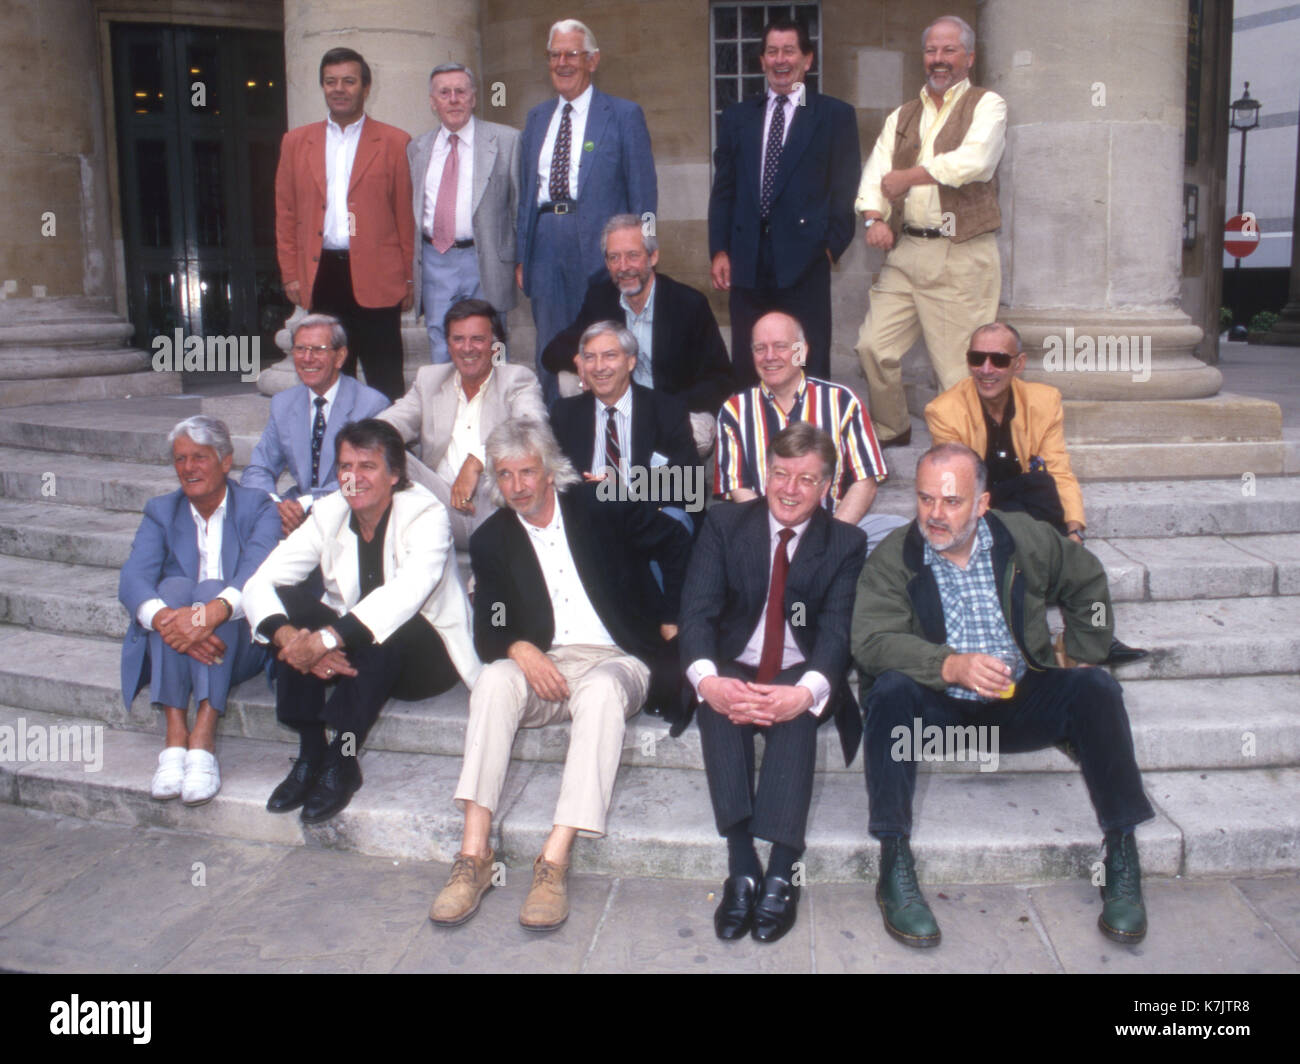 Photo Must Be Credited ©Alpha Press 027422 11/07/97 Line up of Radio 1 DJs Re-United on the steps of All Souls Church on Langham Place in West London. L-R back row, Tony Blackburn, Jimmy Young, Robin Scott, Duncan Johnson, Dave Cash and Pete Brady. L-R Middle row, Bob Holness, Terry Wogan, Keith Skues, Chris Denning and Pete Myers. L-R Front row, Pete Murray, Ed Stewpot Stewart, Pete Drummond, Mike Aherne and John Peel Stock Photo